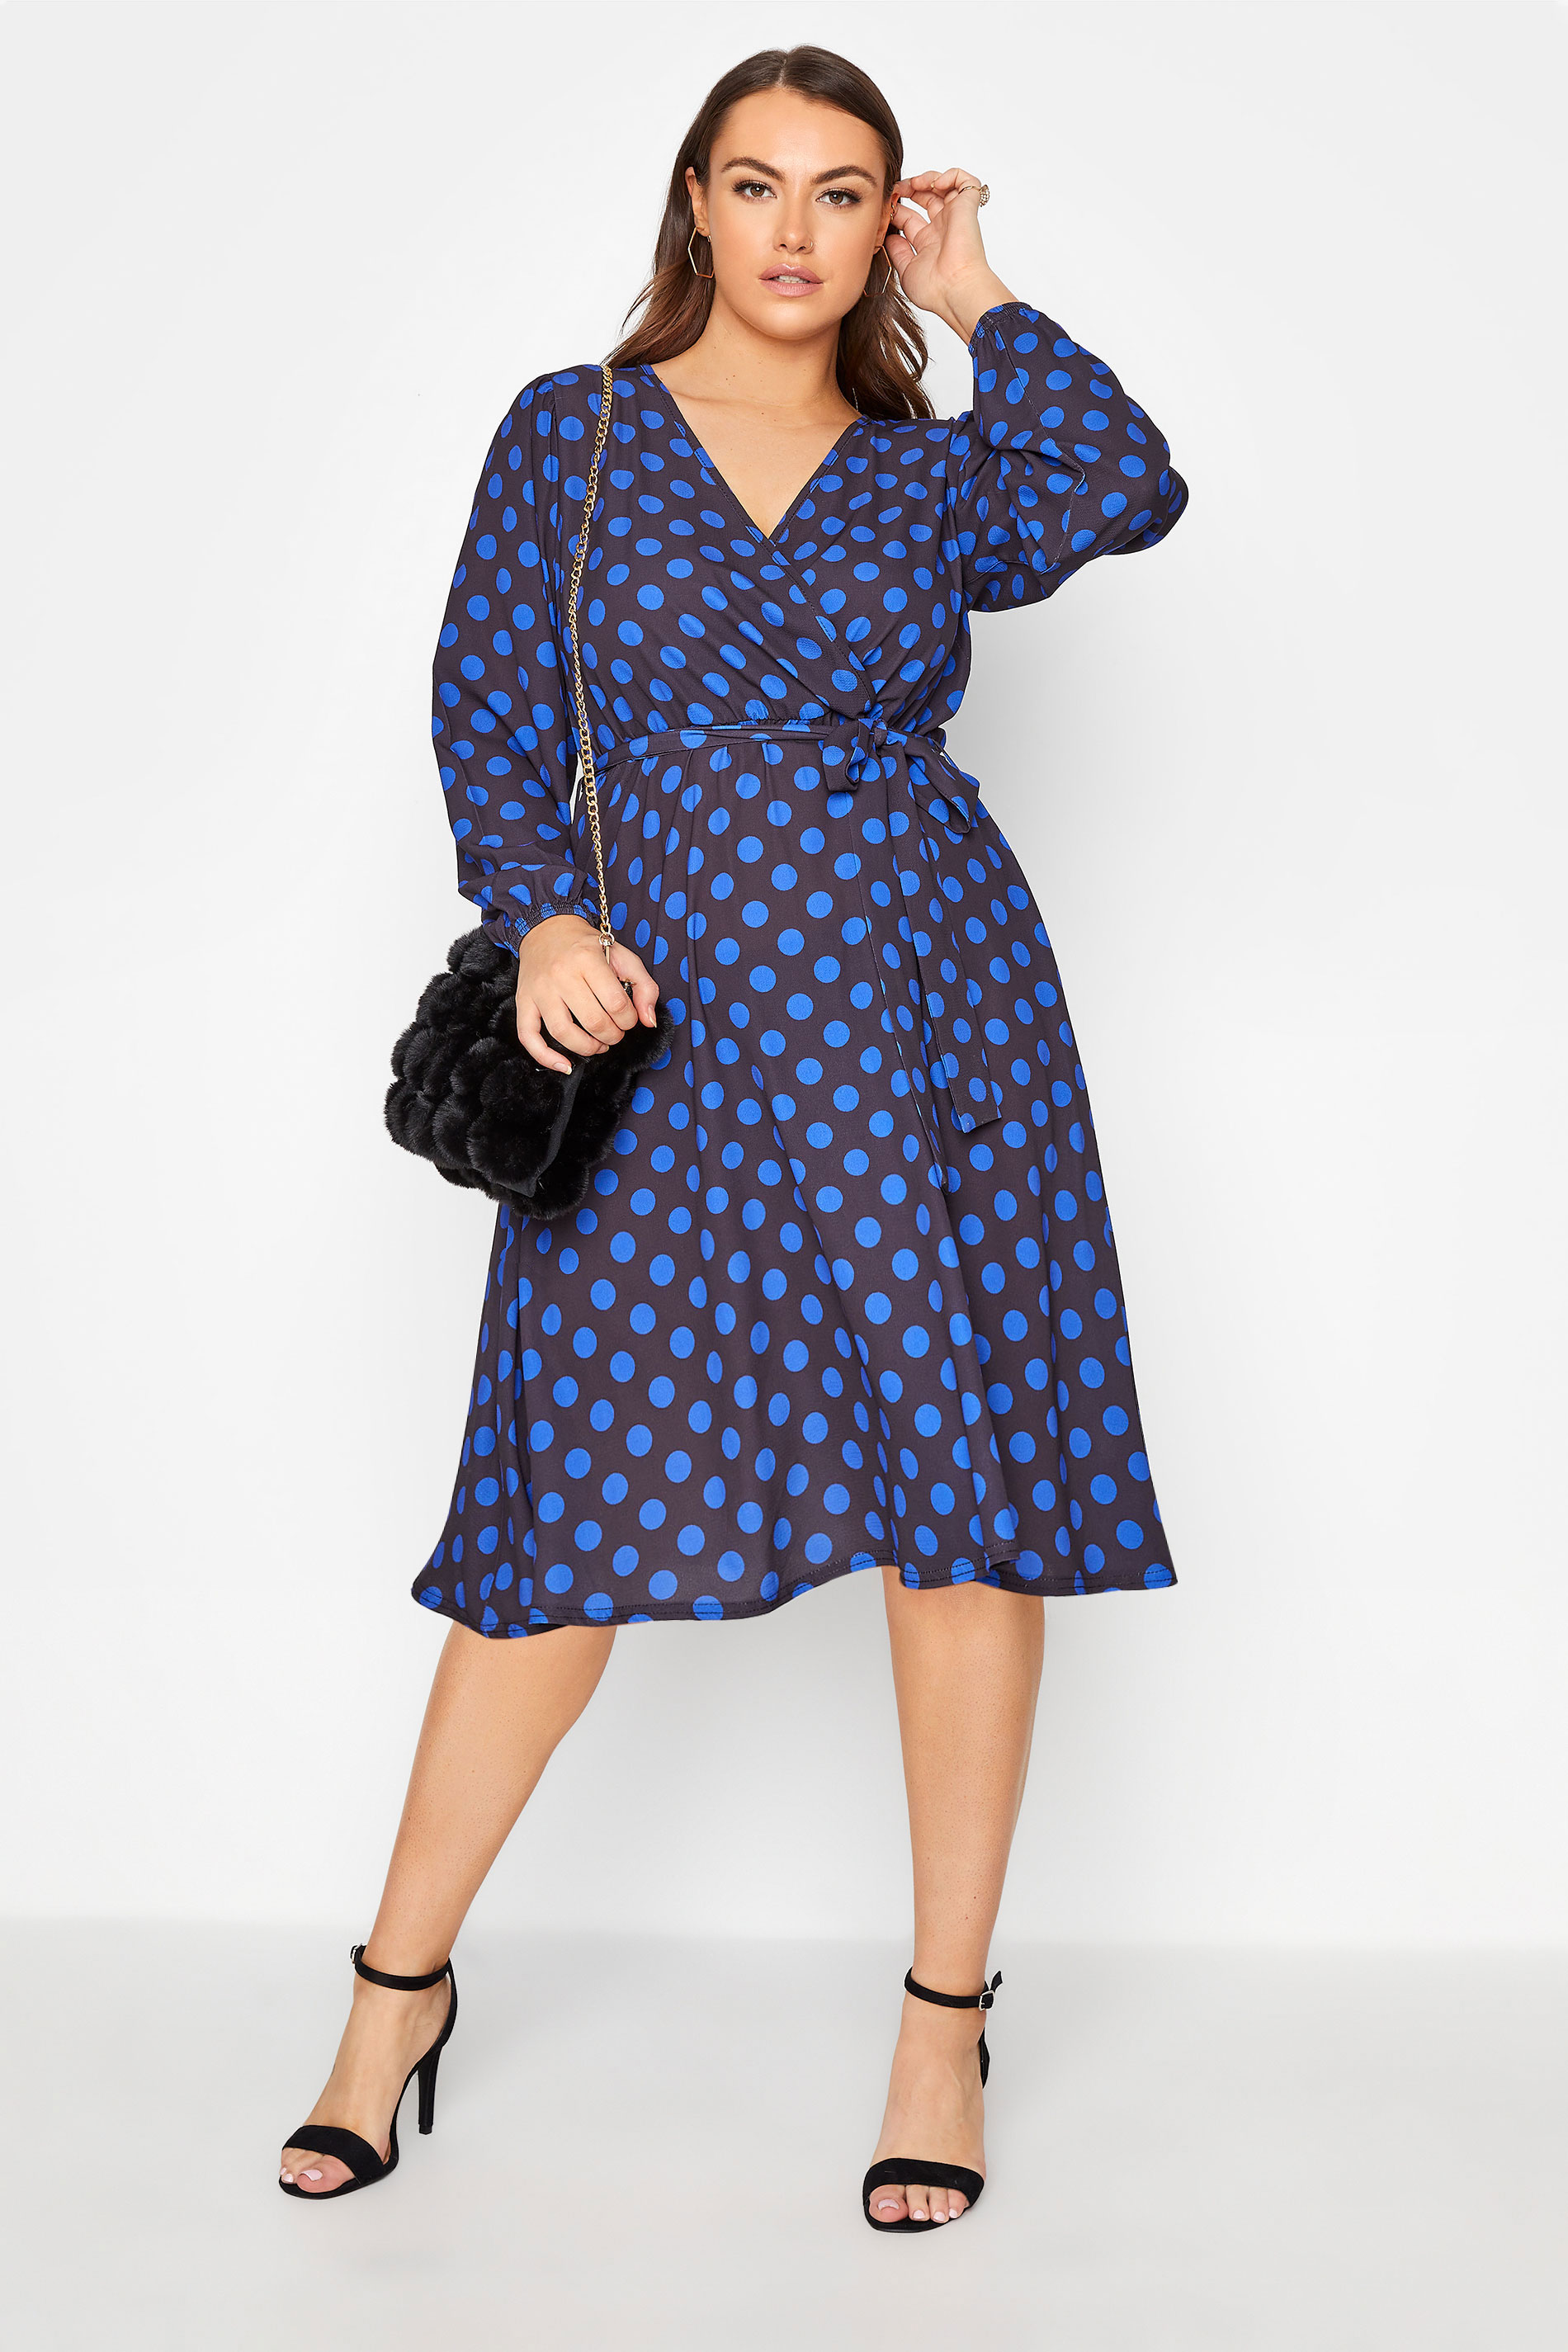 Robes Grande Taille Grande taille  Robes Portefeuilles | YOURS LONDON - Robe Bleue Marine à Pois Cache-Coeur - IR28147